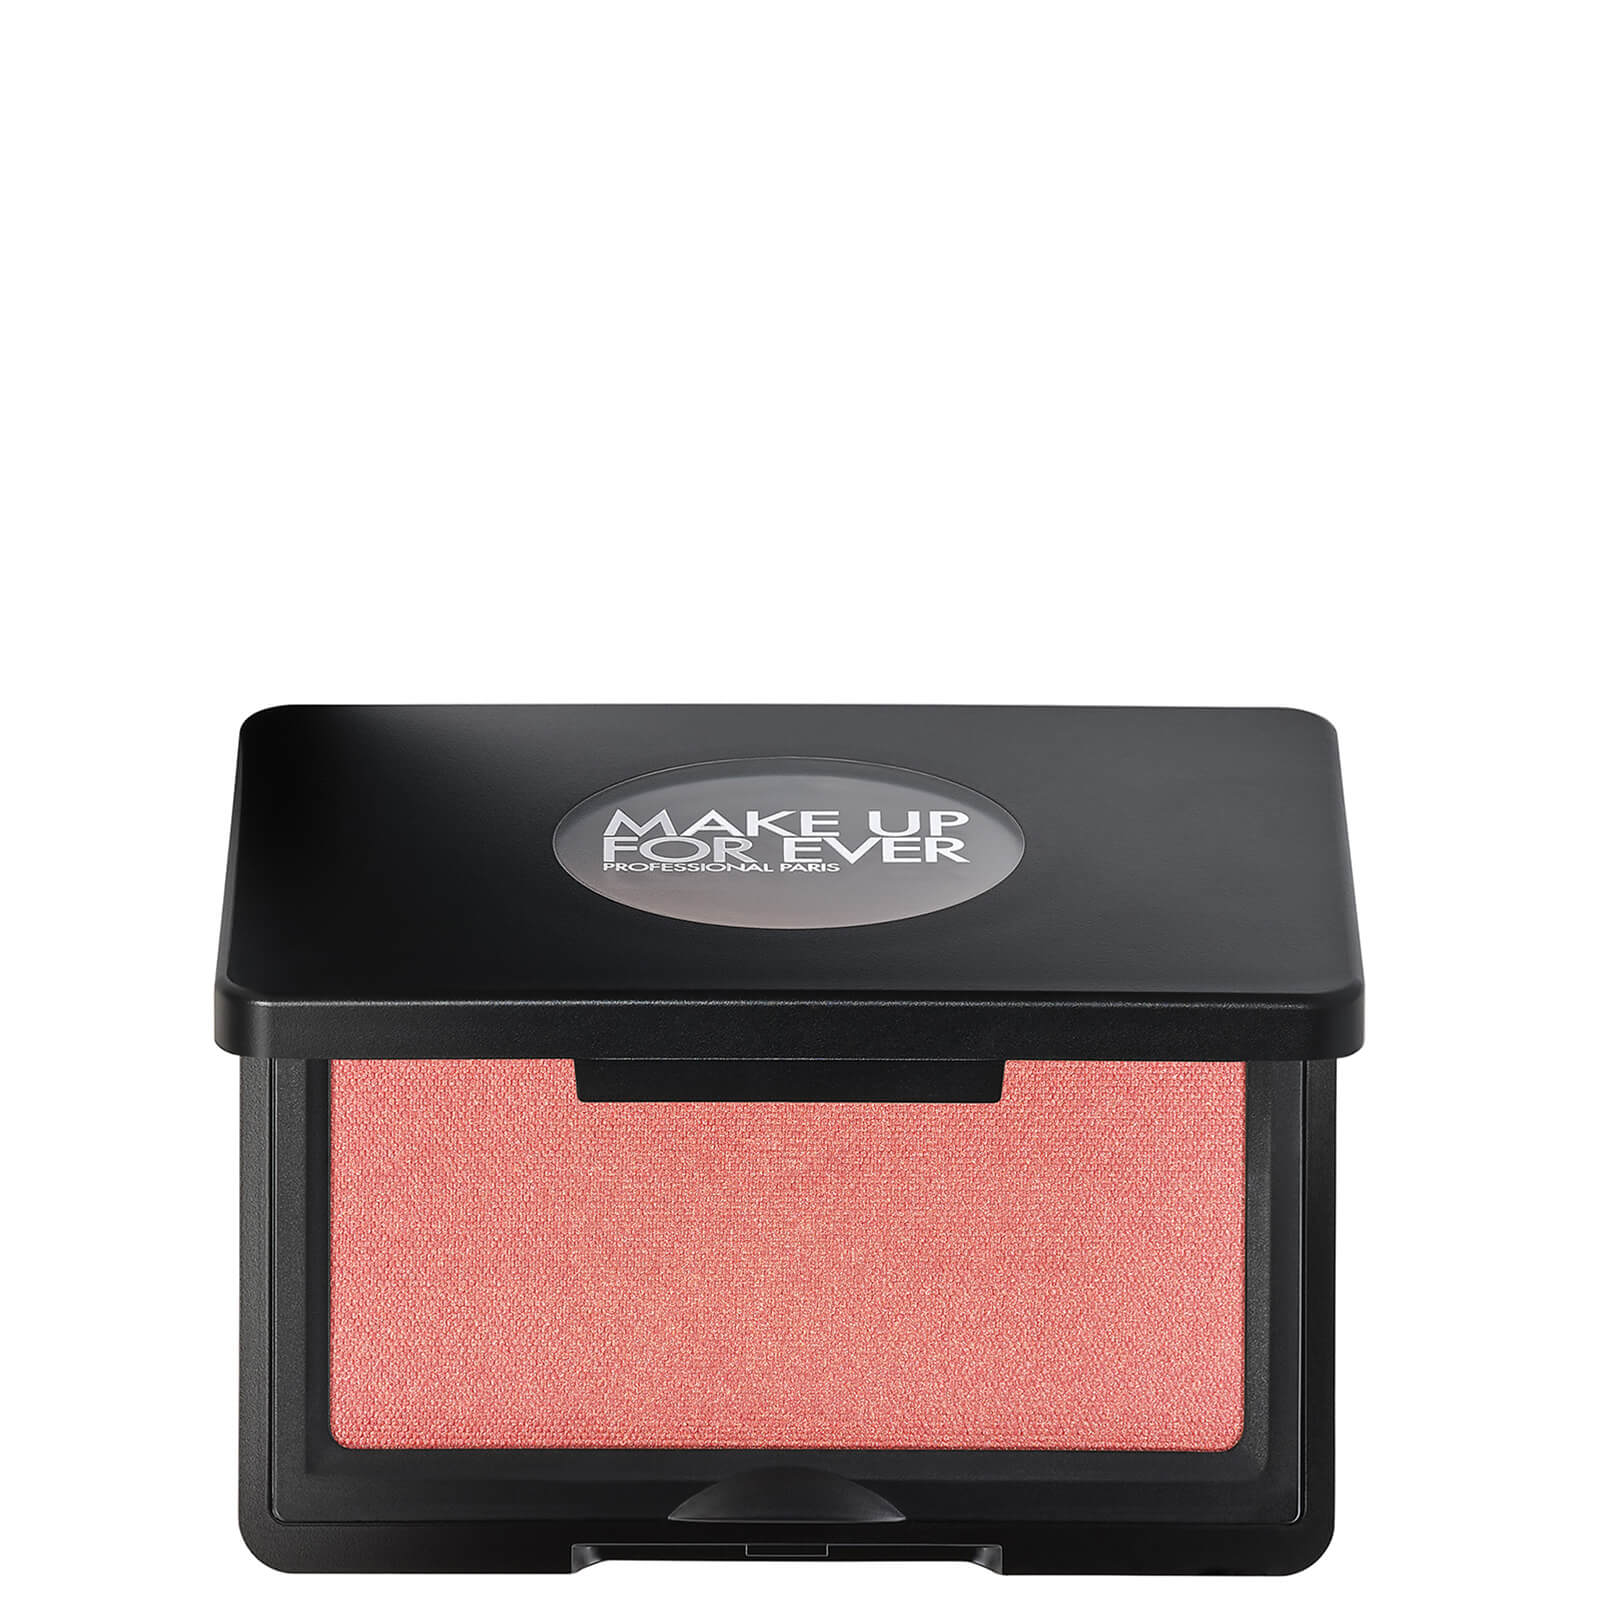 MAKE UP FOR EVER Artist Face Powders Blush 4g (Various Shades) - B210 - Bold Punch